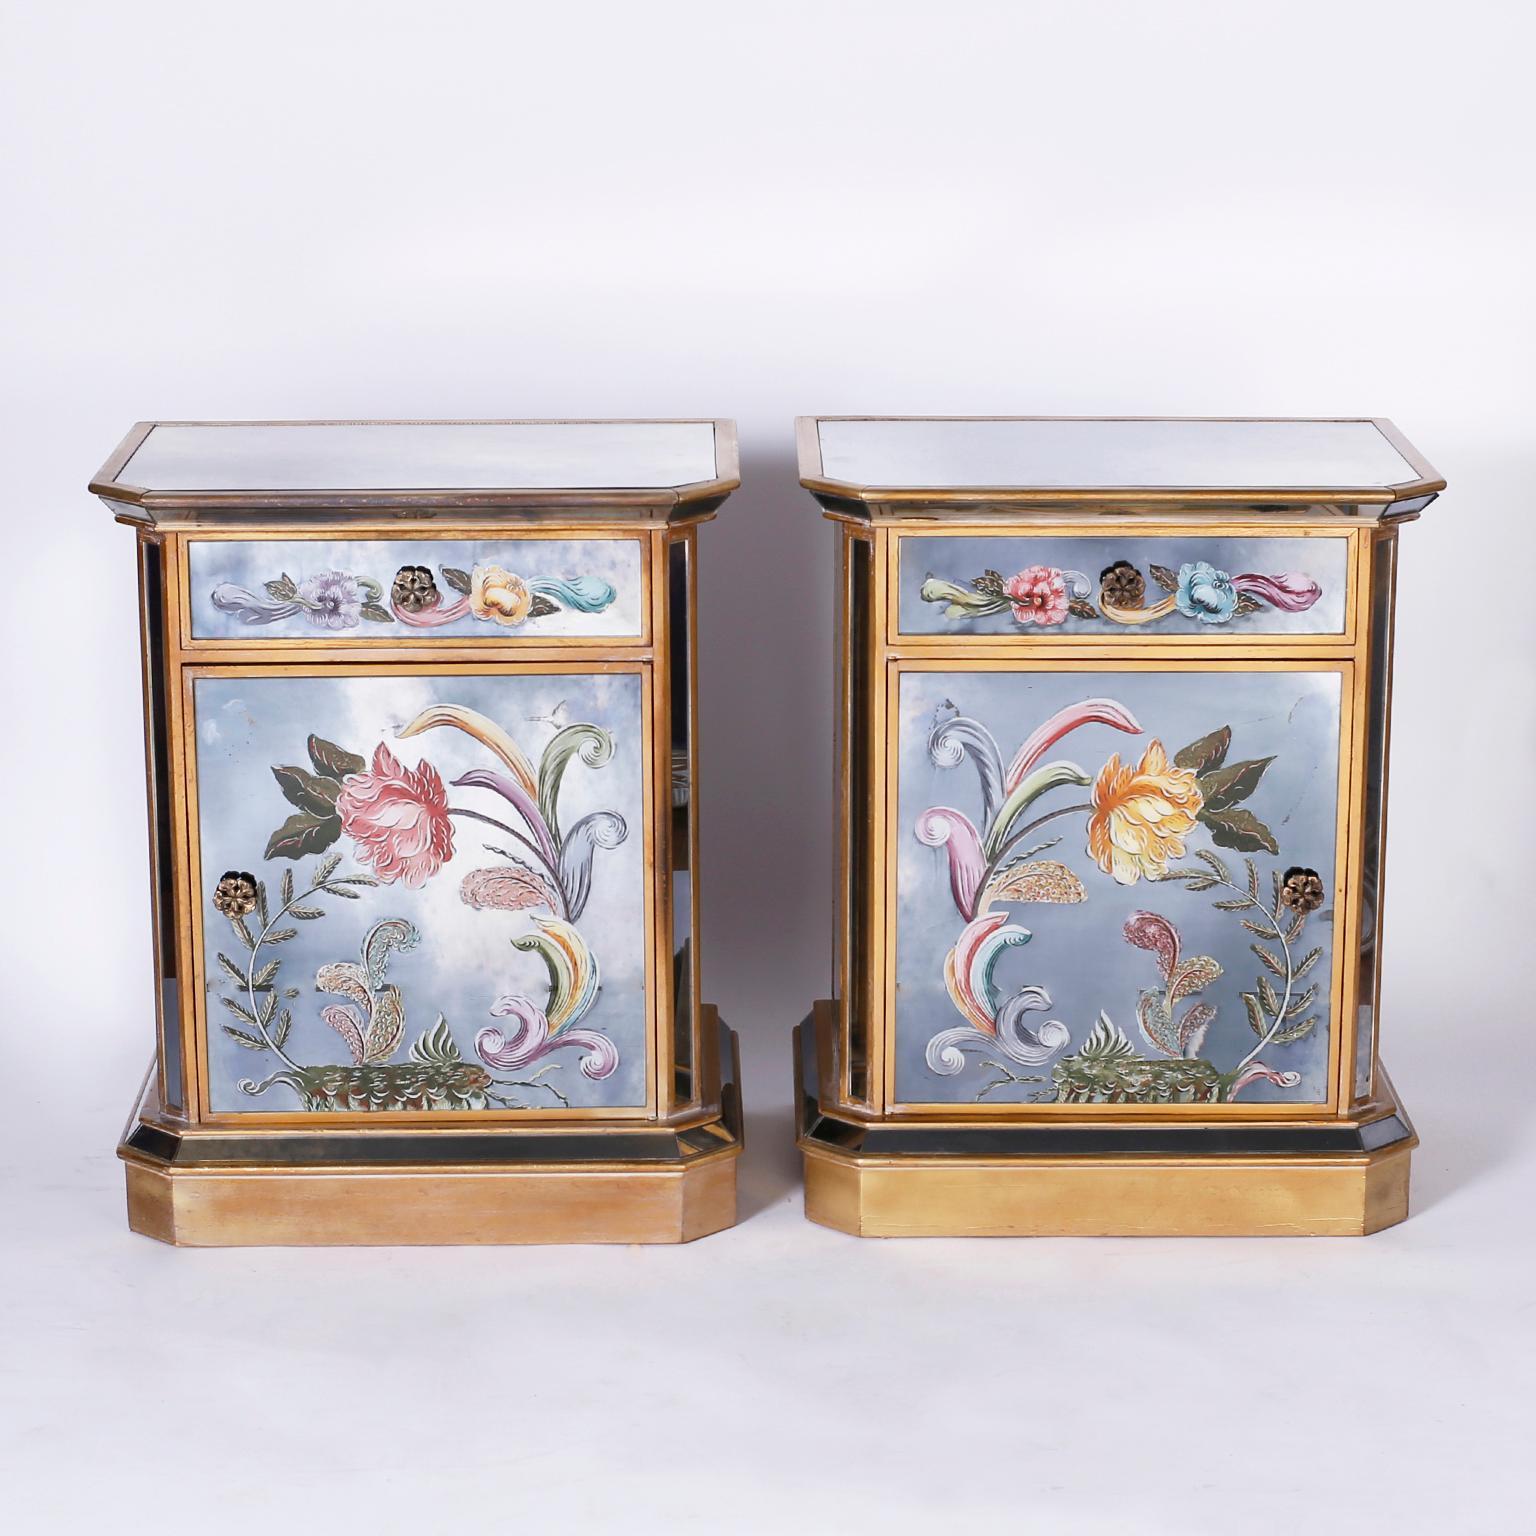 Pair of mirrored night stands or end tables with a Classic form and reverse painted or églomisé panels decorated with dramatic floral designs. Featuring slide out shelves, old world style painted trim, and floral brass hardware.